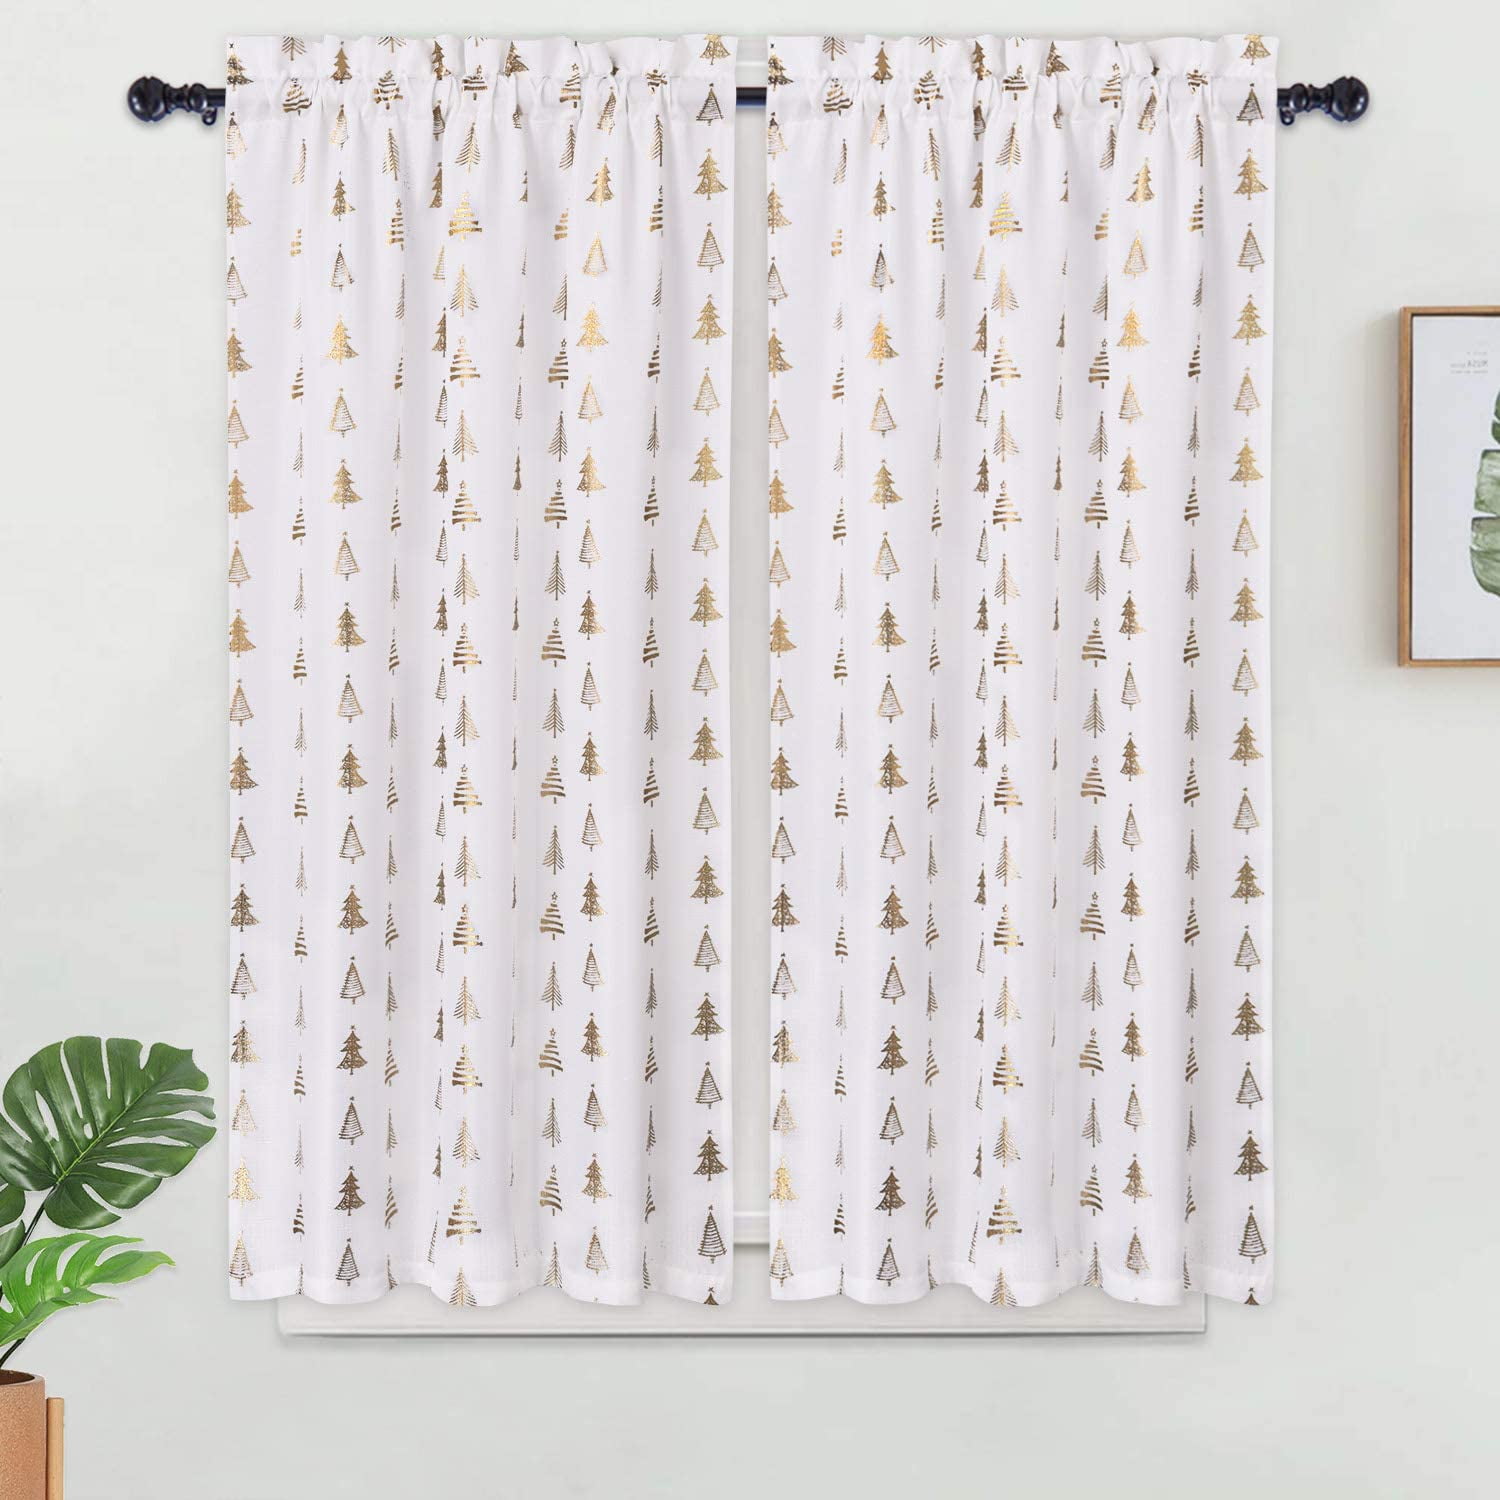 kitchen curtain bistro curtain Kamaca Net curtain 45 x 145 cm mountain landscape a jewel in every kitchen H x W delicate voile with trendy photo print